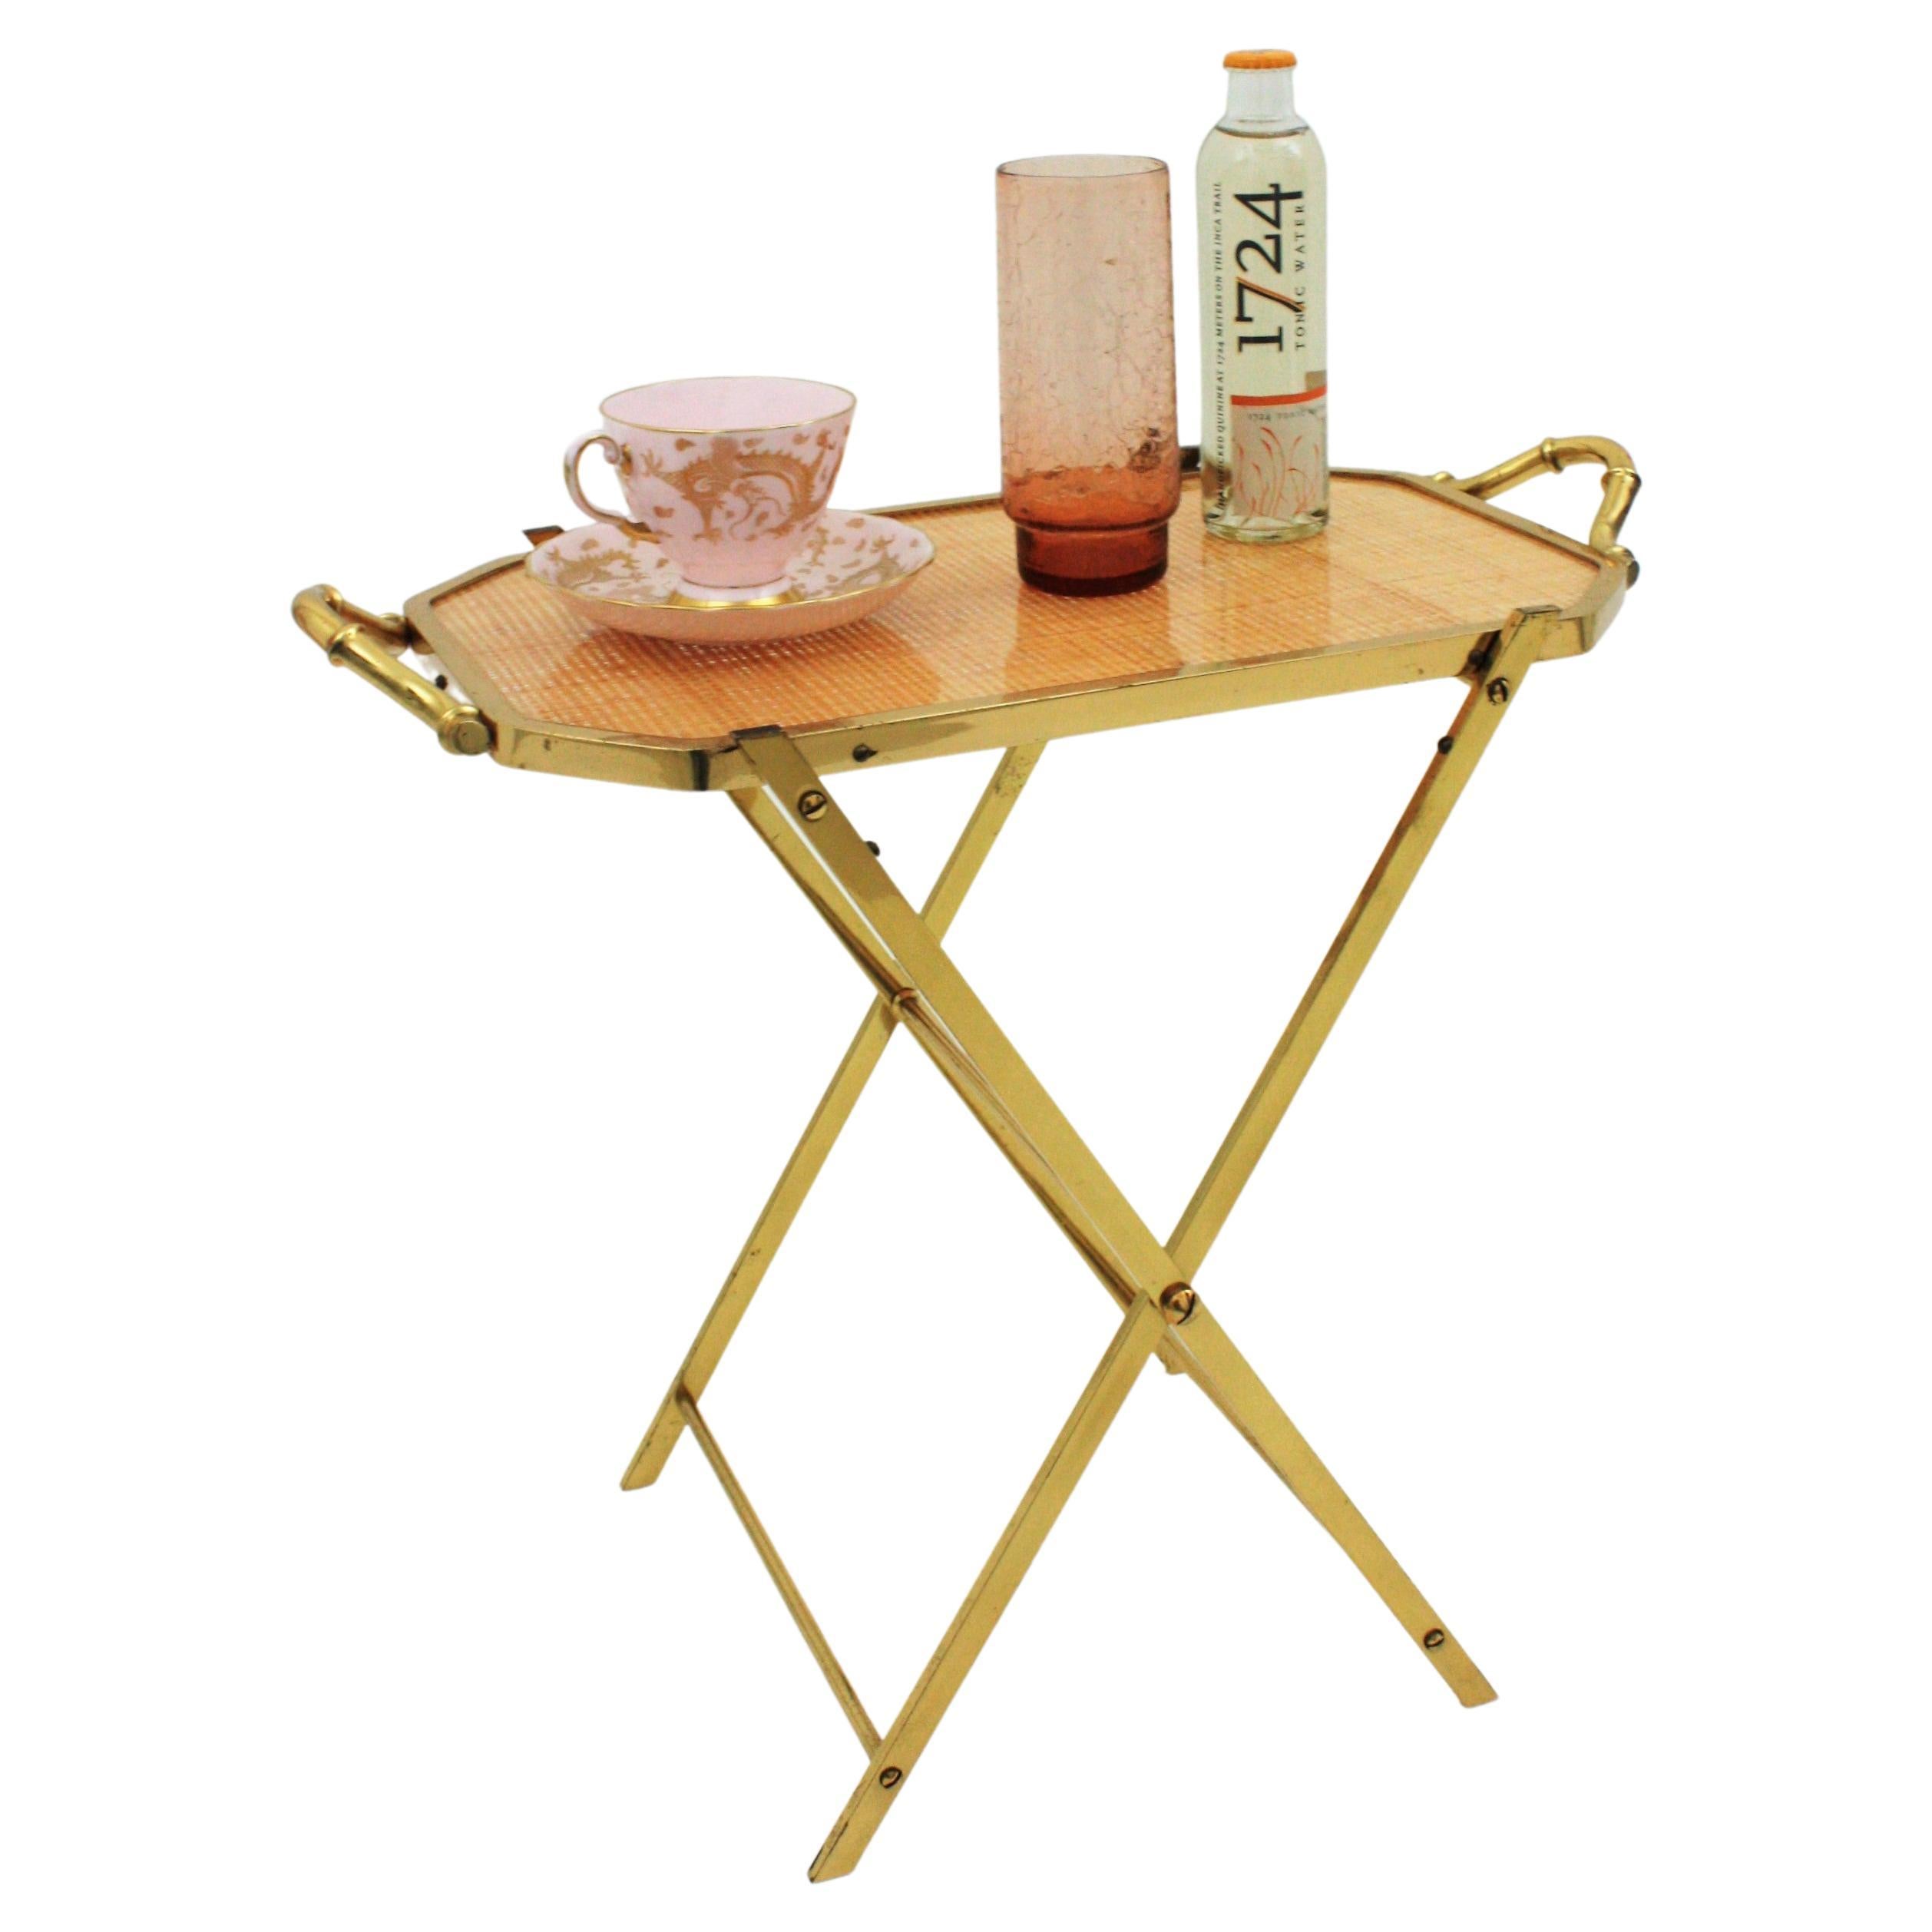 Dior Home  faux bamboo brass and rattan folding tray table, France, 1970s.
This cocktails table or drinks table features an X-base folding stand with a serving tray comprised of a sheet of Lucite with embedded woven rattan/cane work in an octogonal